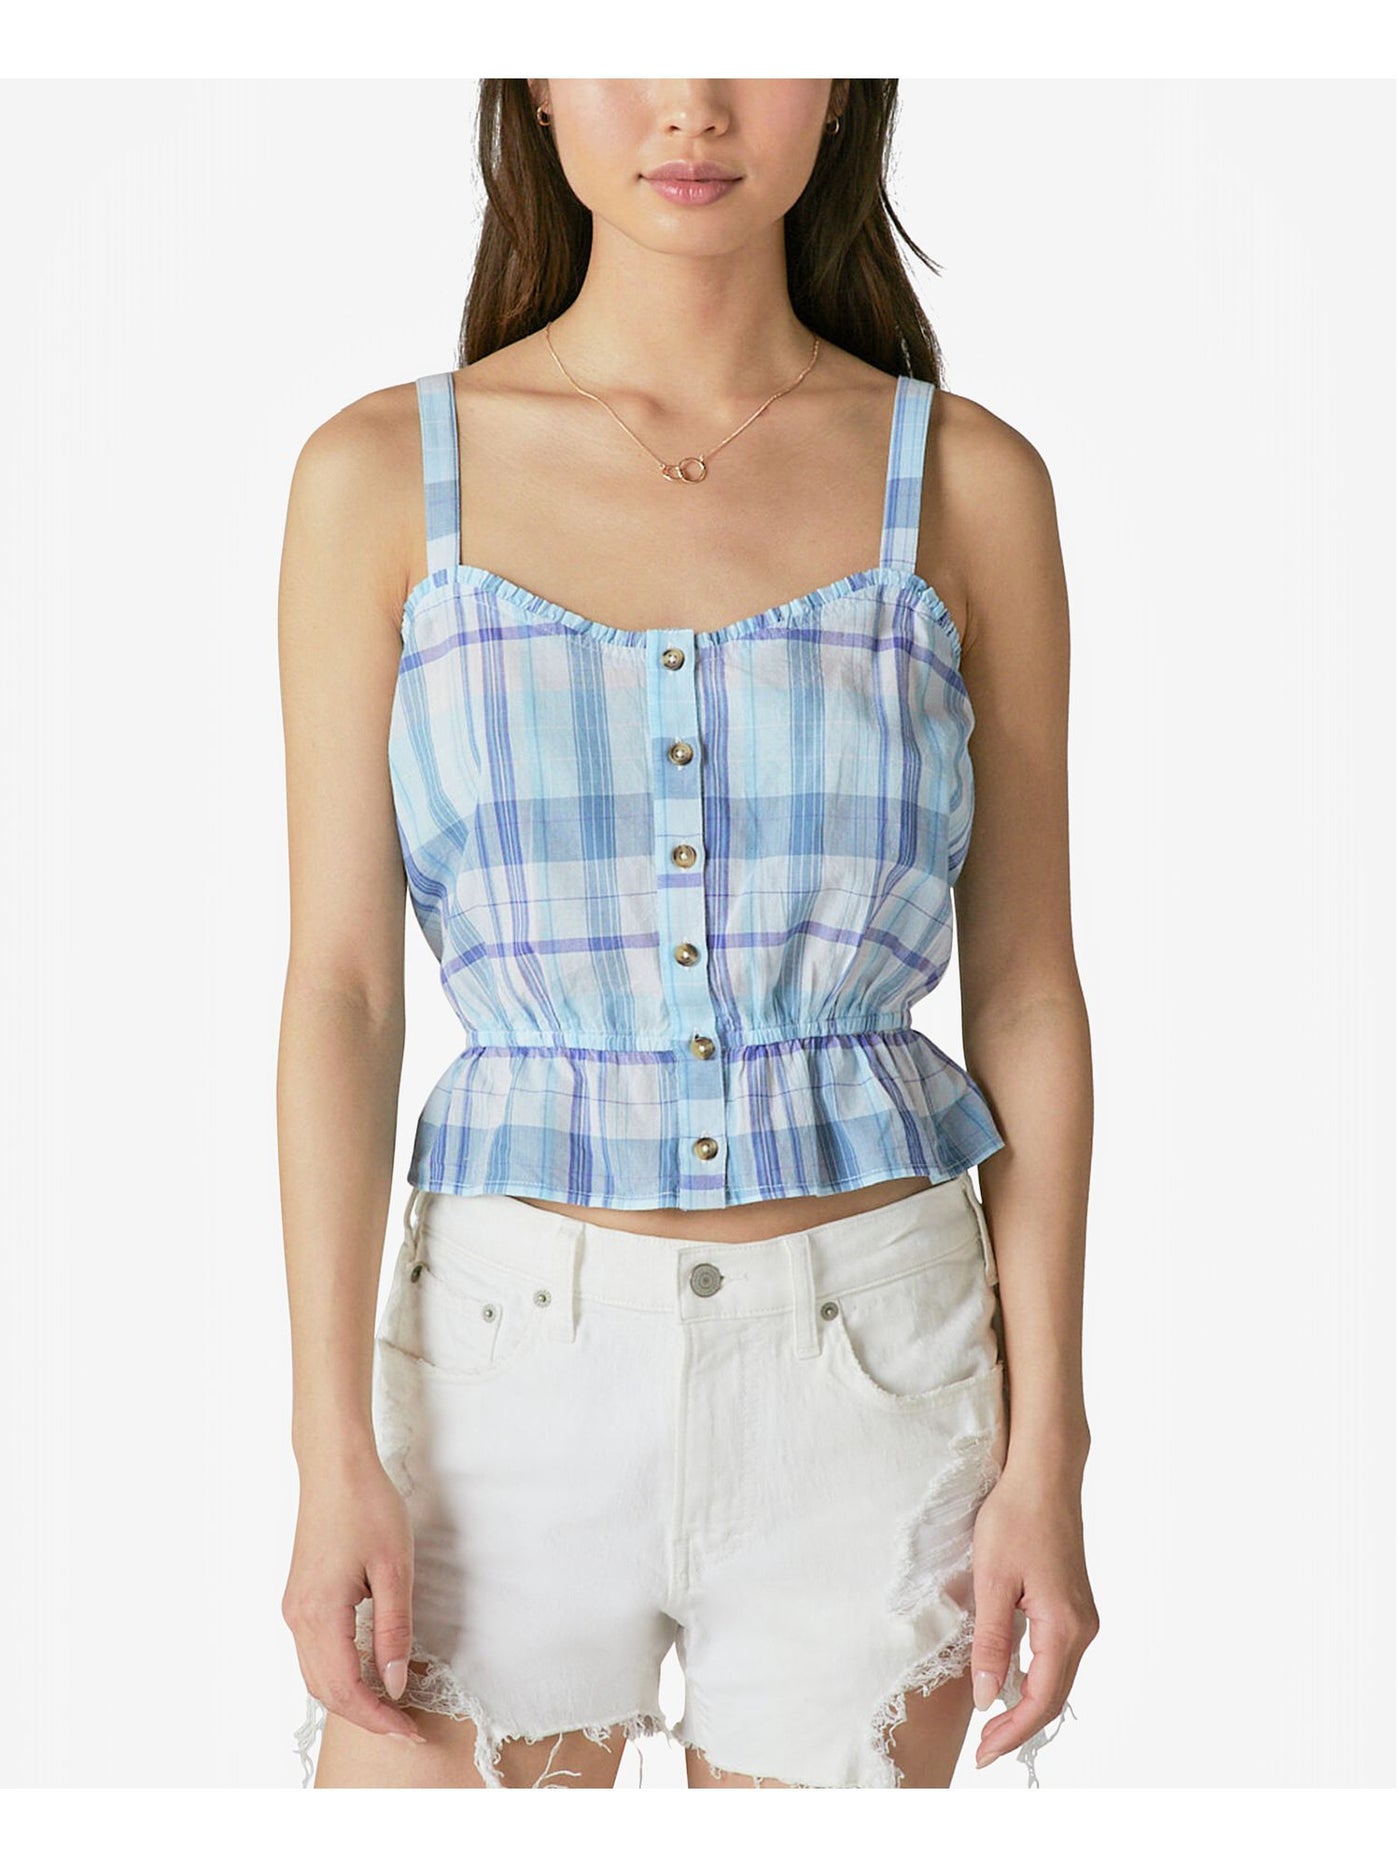 LUCKY BRAND Womens Blue Ruffled Smocked Button-front Closures Plaid Sleeveless Square Neck Tank Top XL